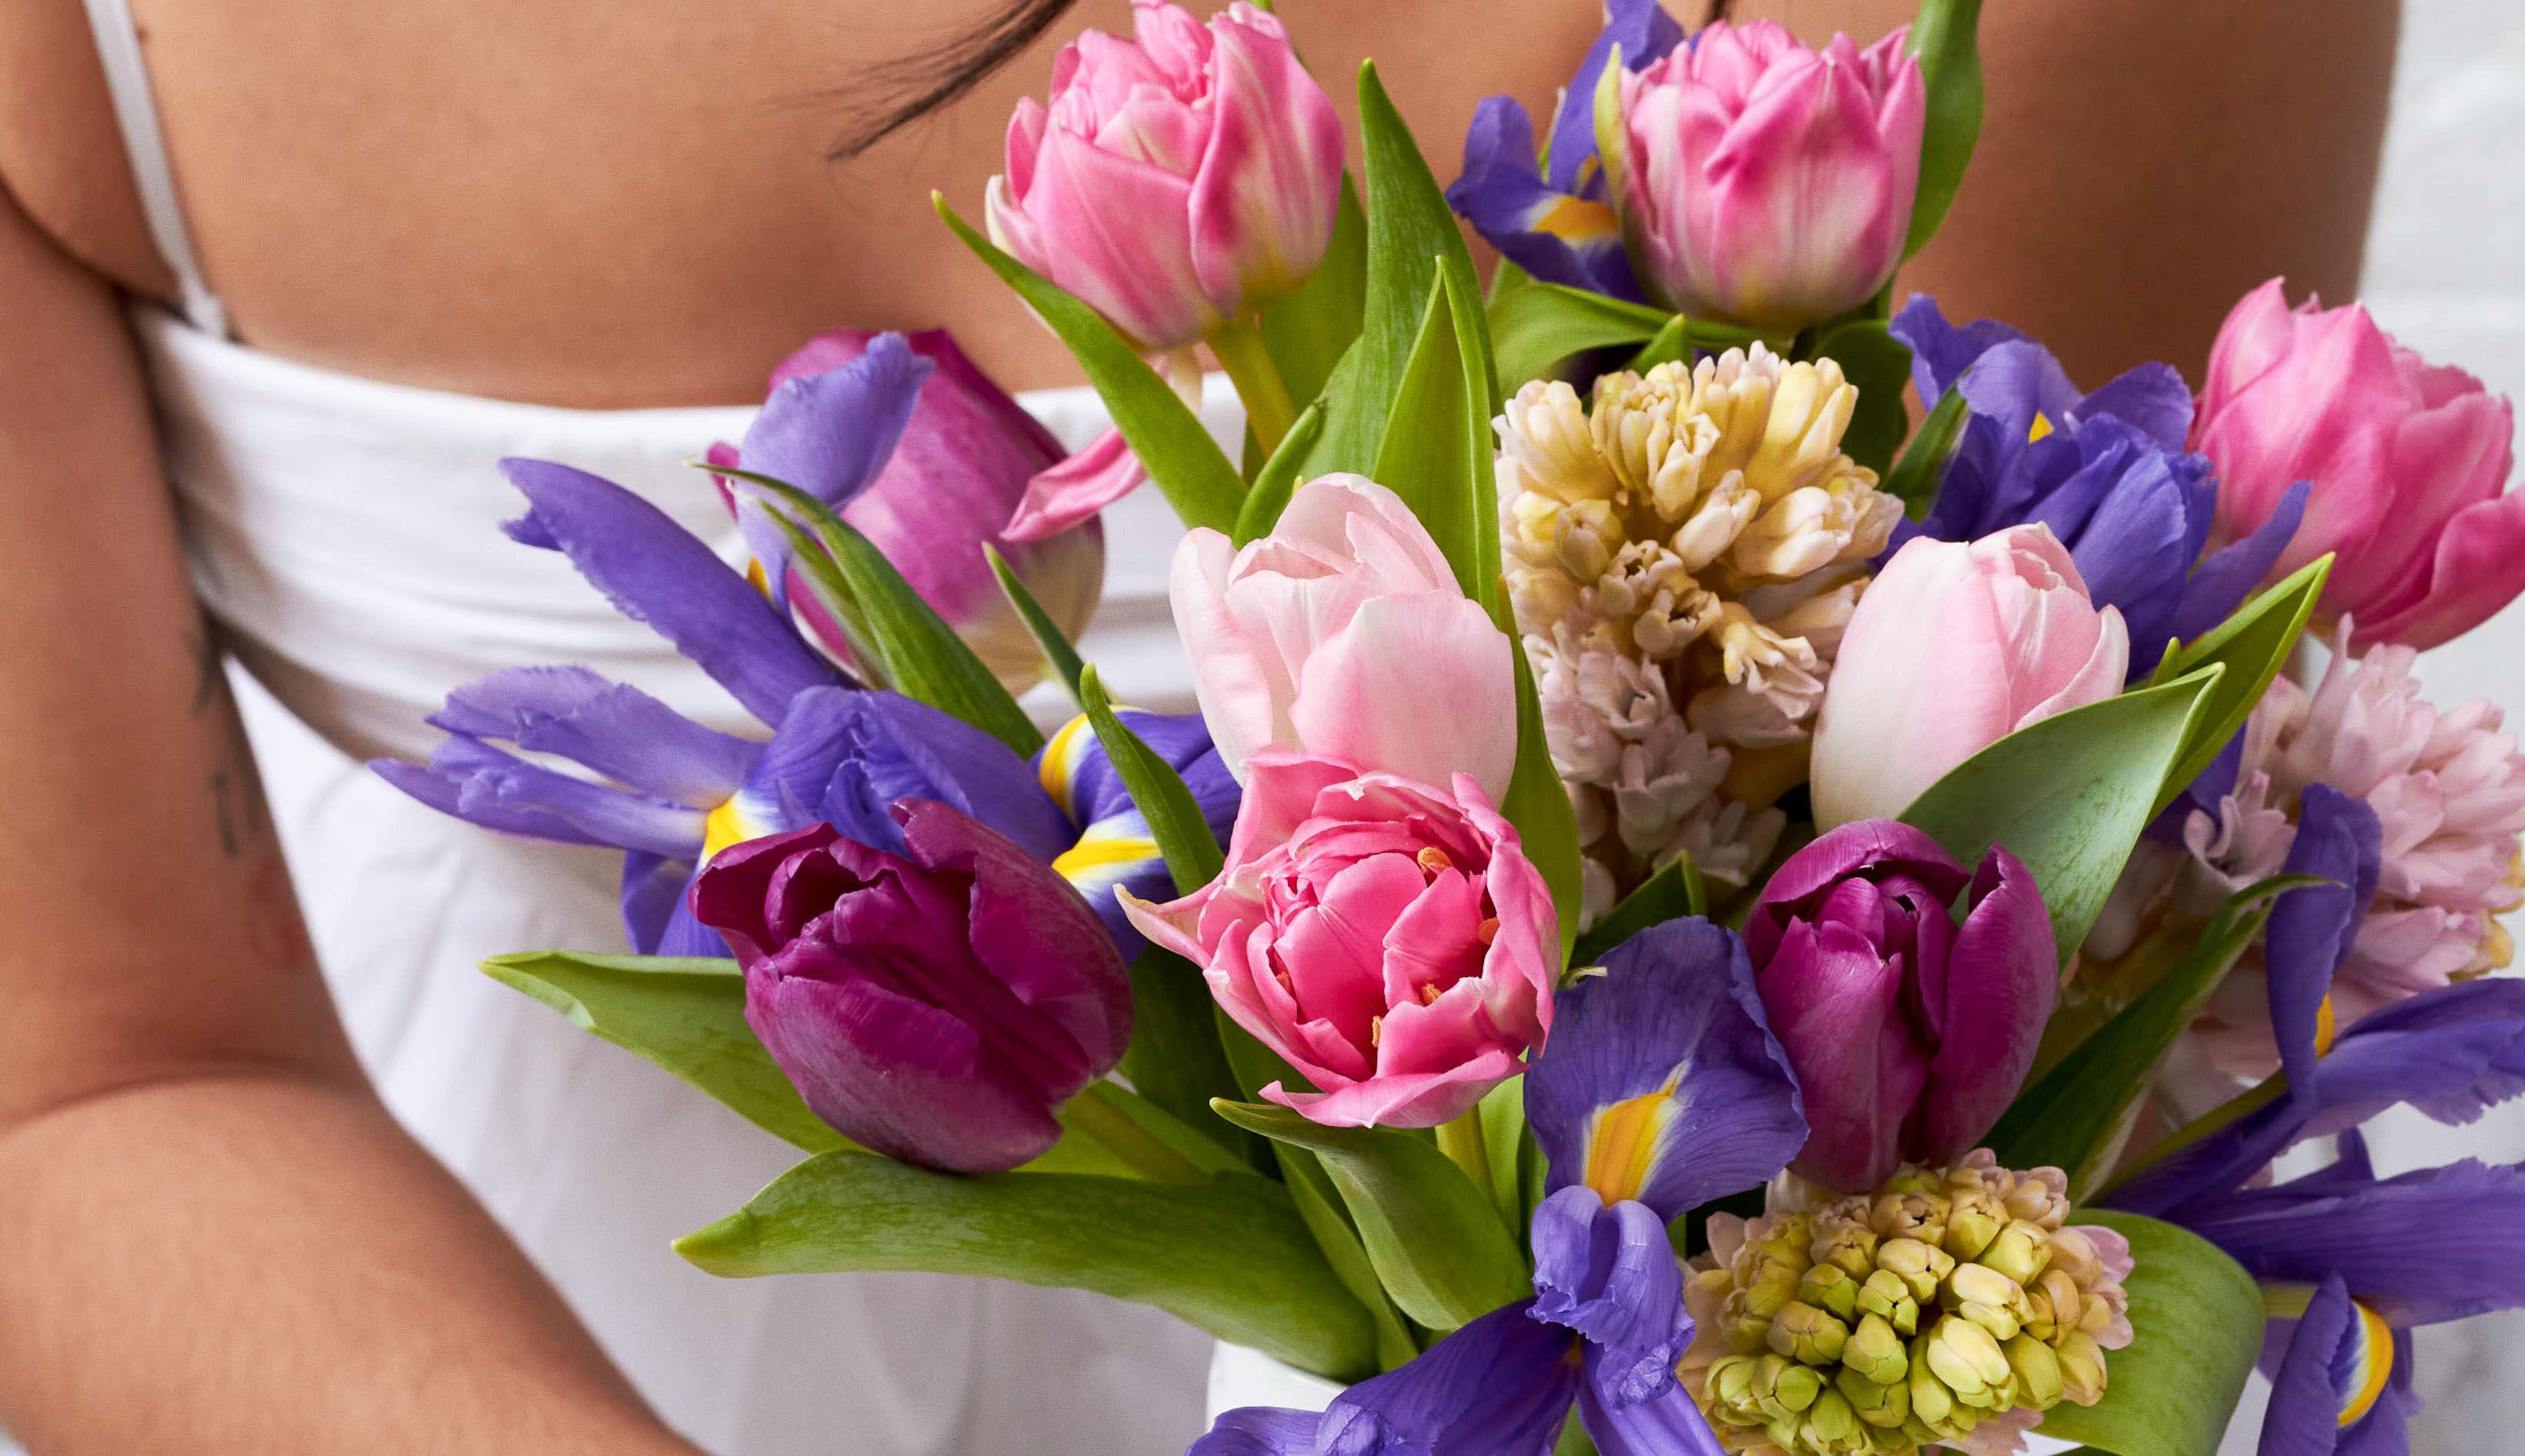 A bouquet of springtime flowers in shades of pink and purple